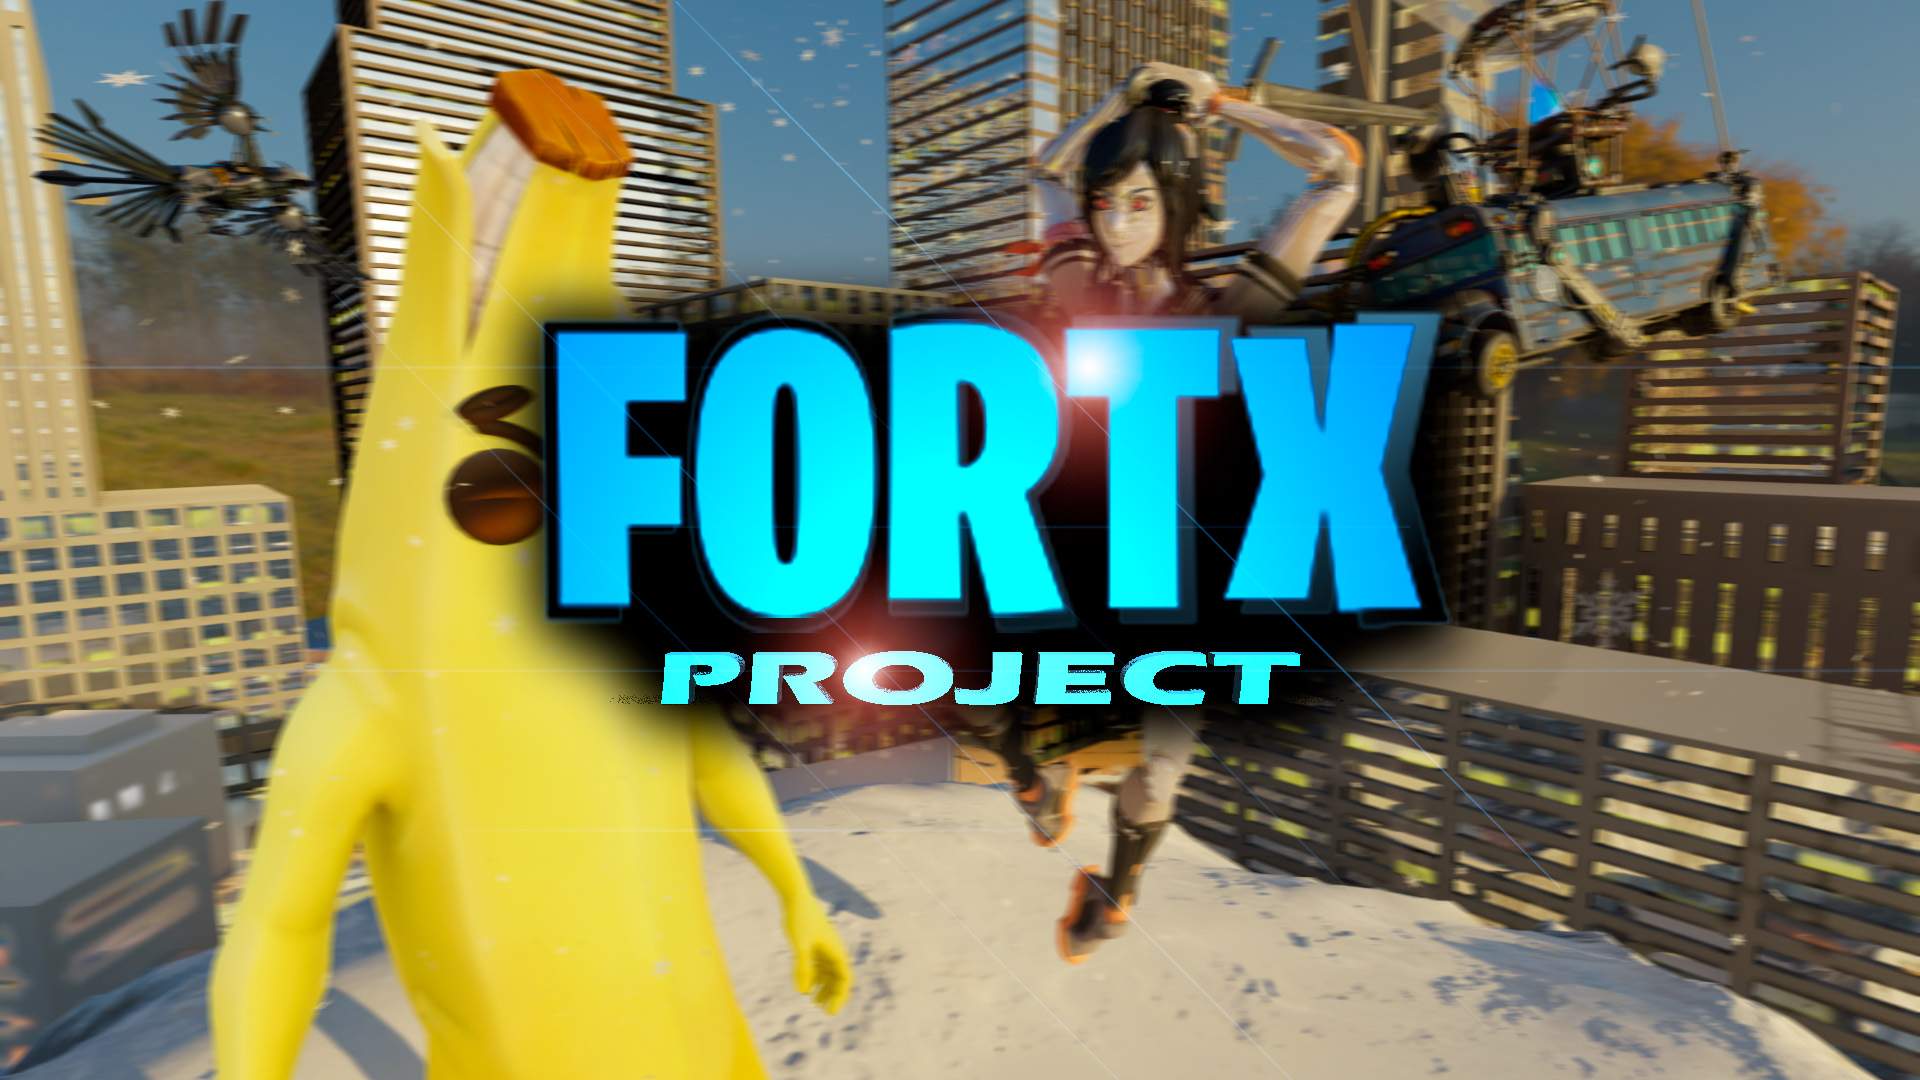 ⚔️FORTX PROJECT🏹